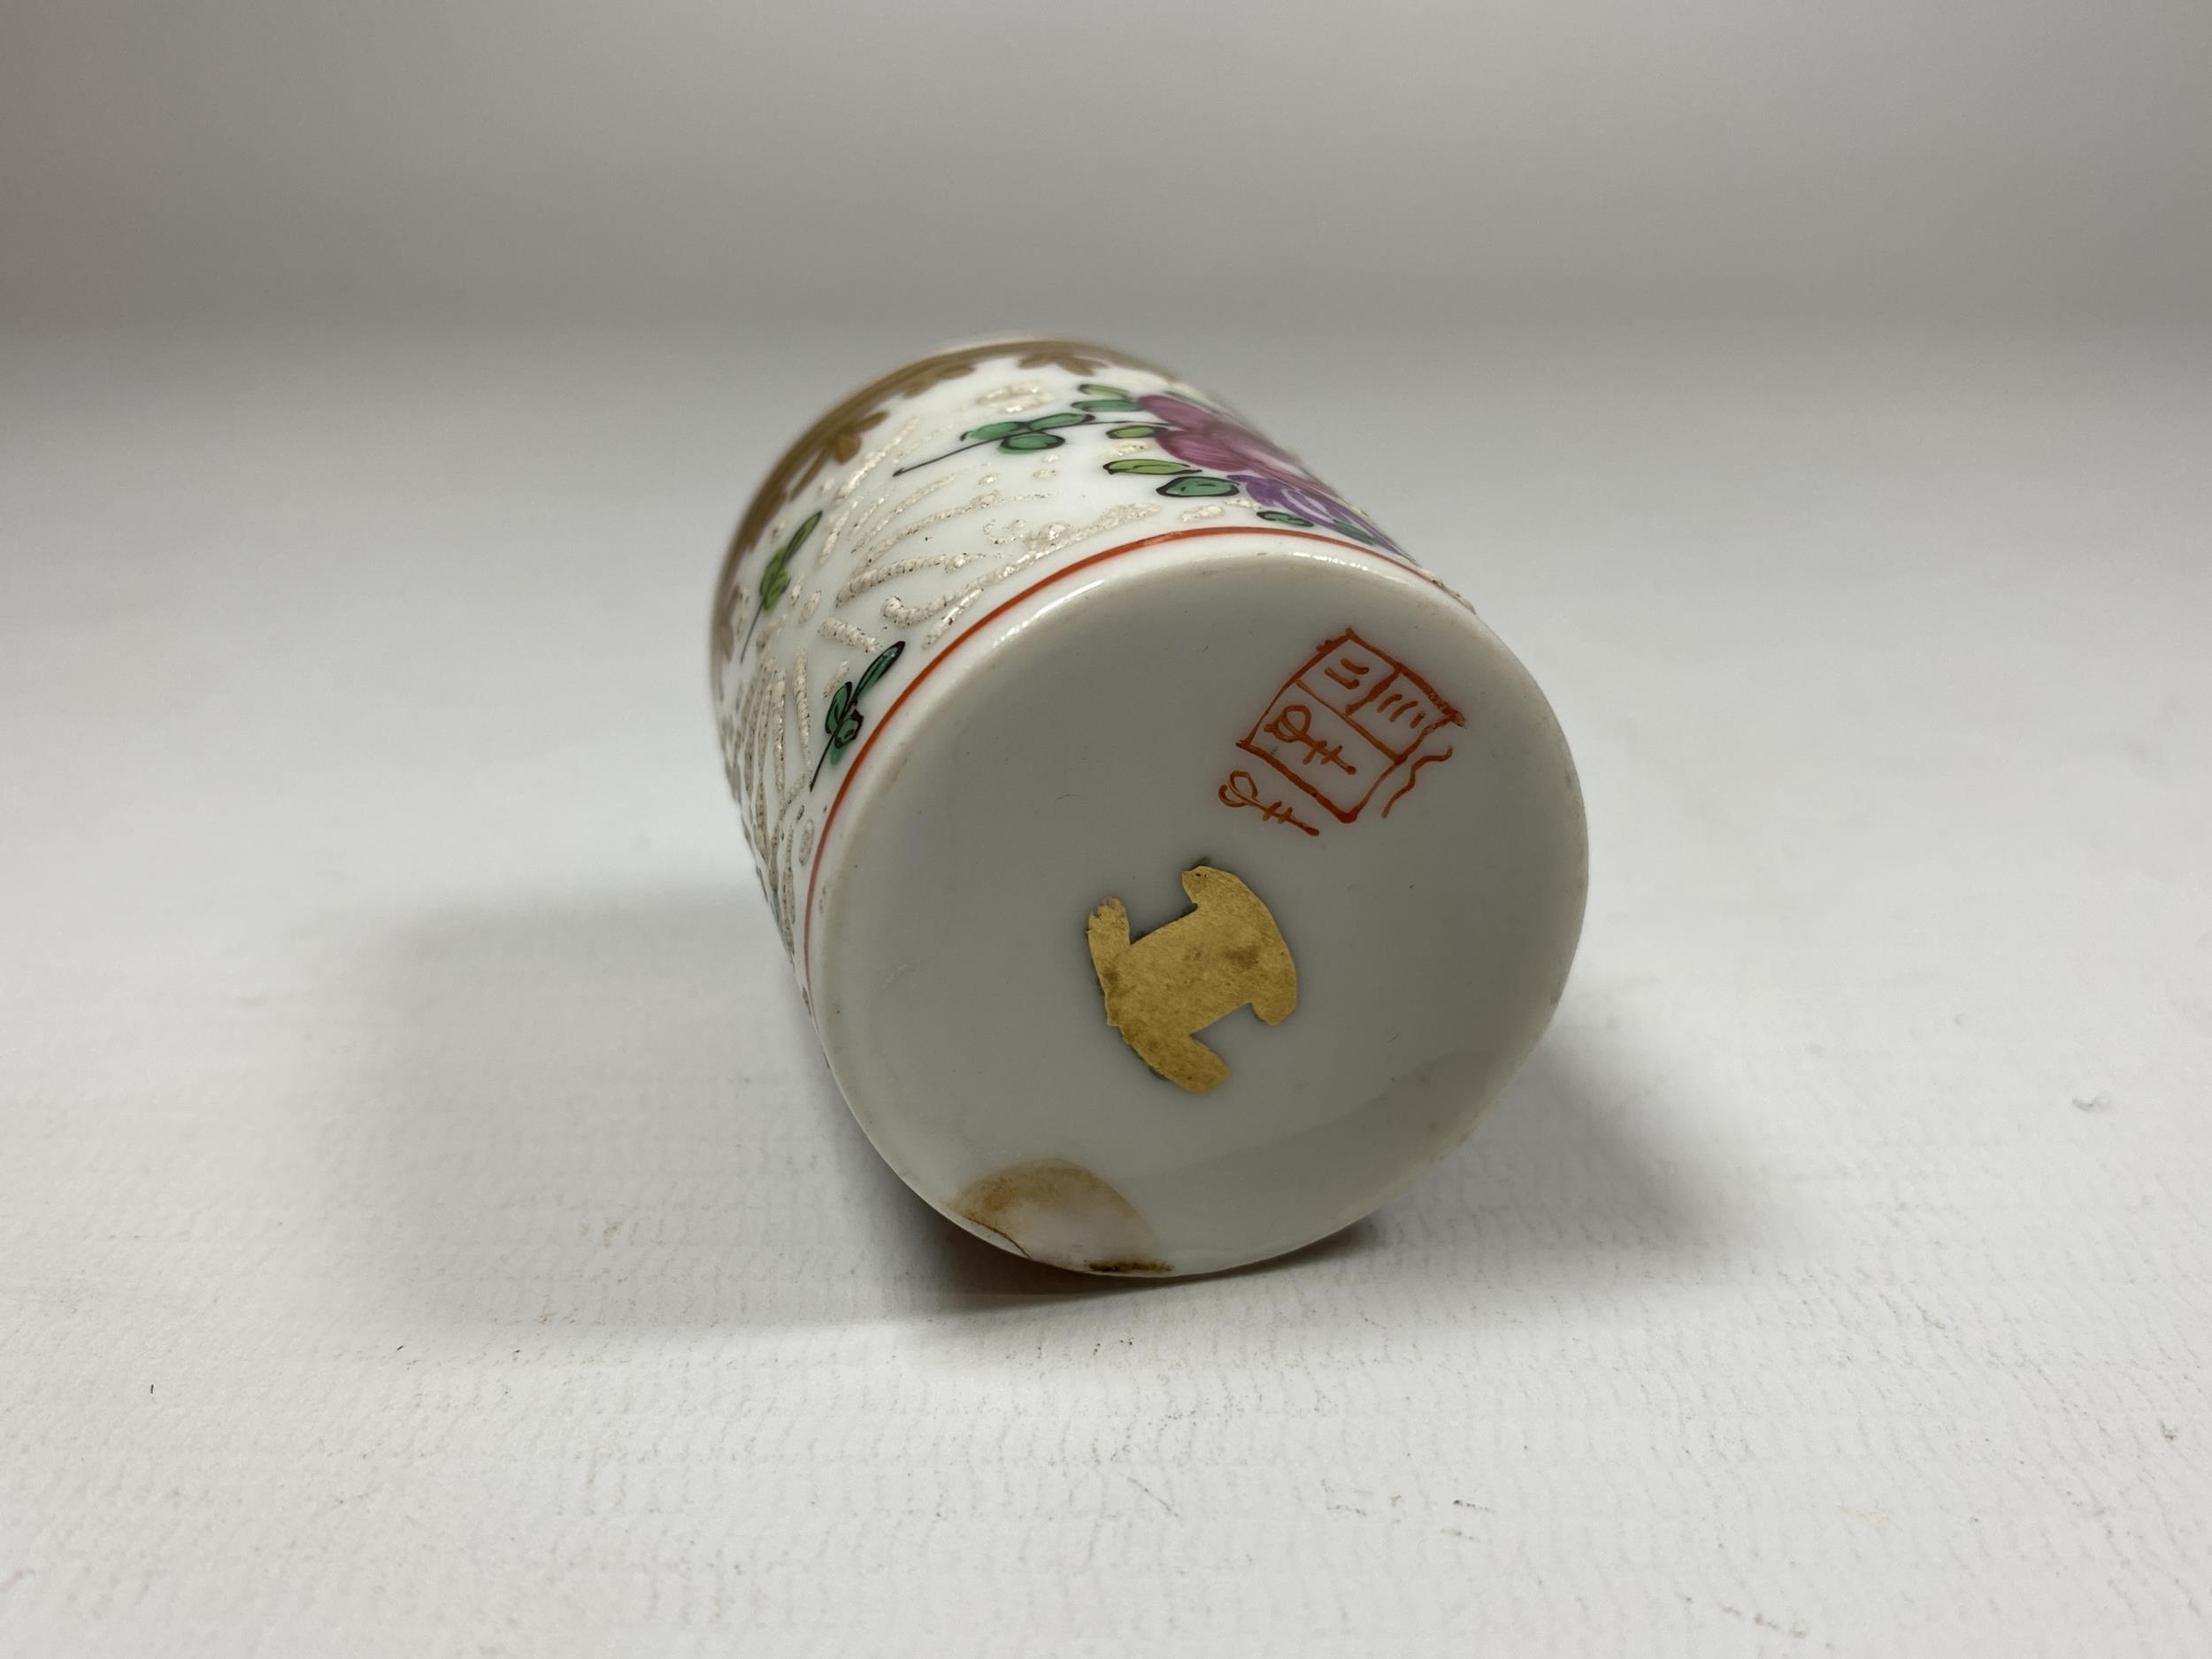 A MINIATURE 19TH CENTURY CHINESE EXPORT PORCELAIN TANKARD, HEIGHT 4CM - Image 3 of 4